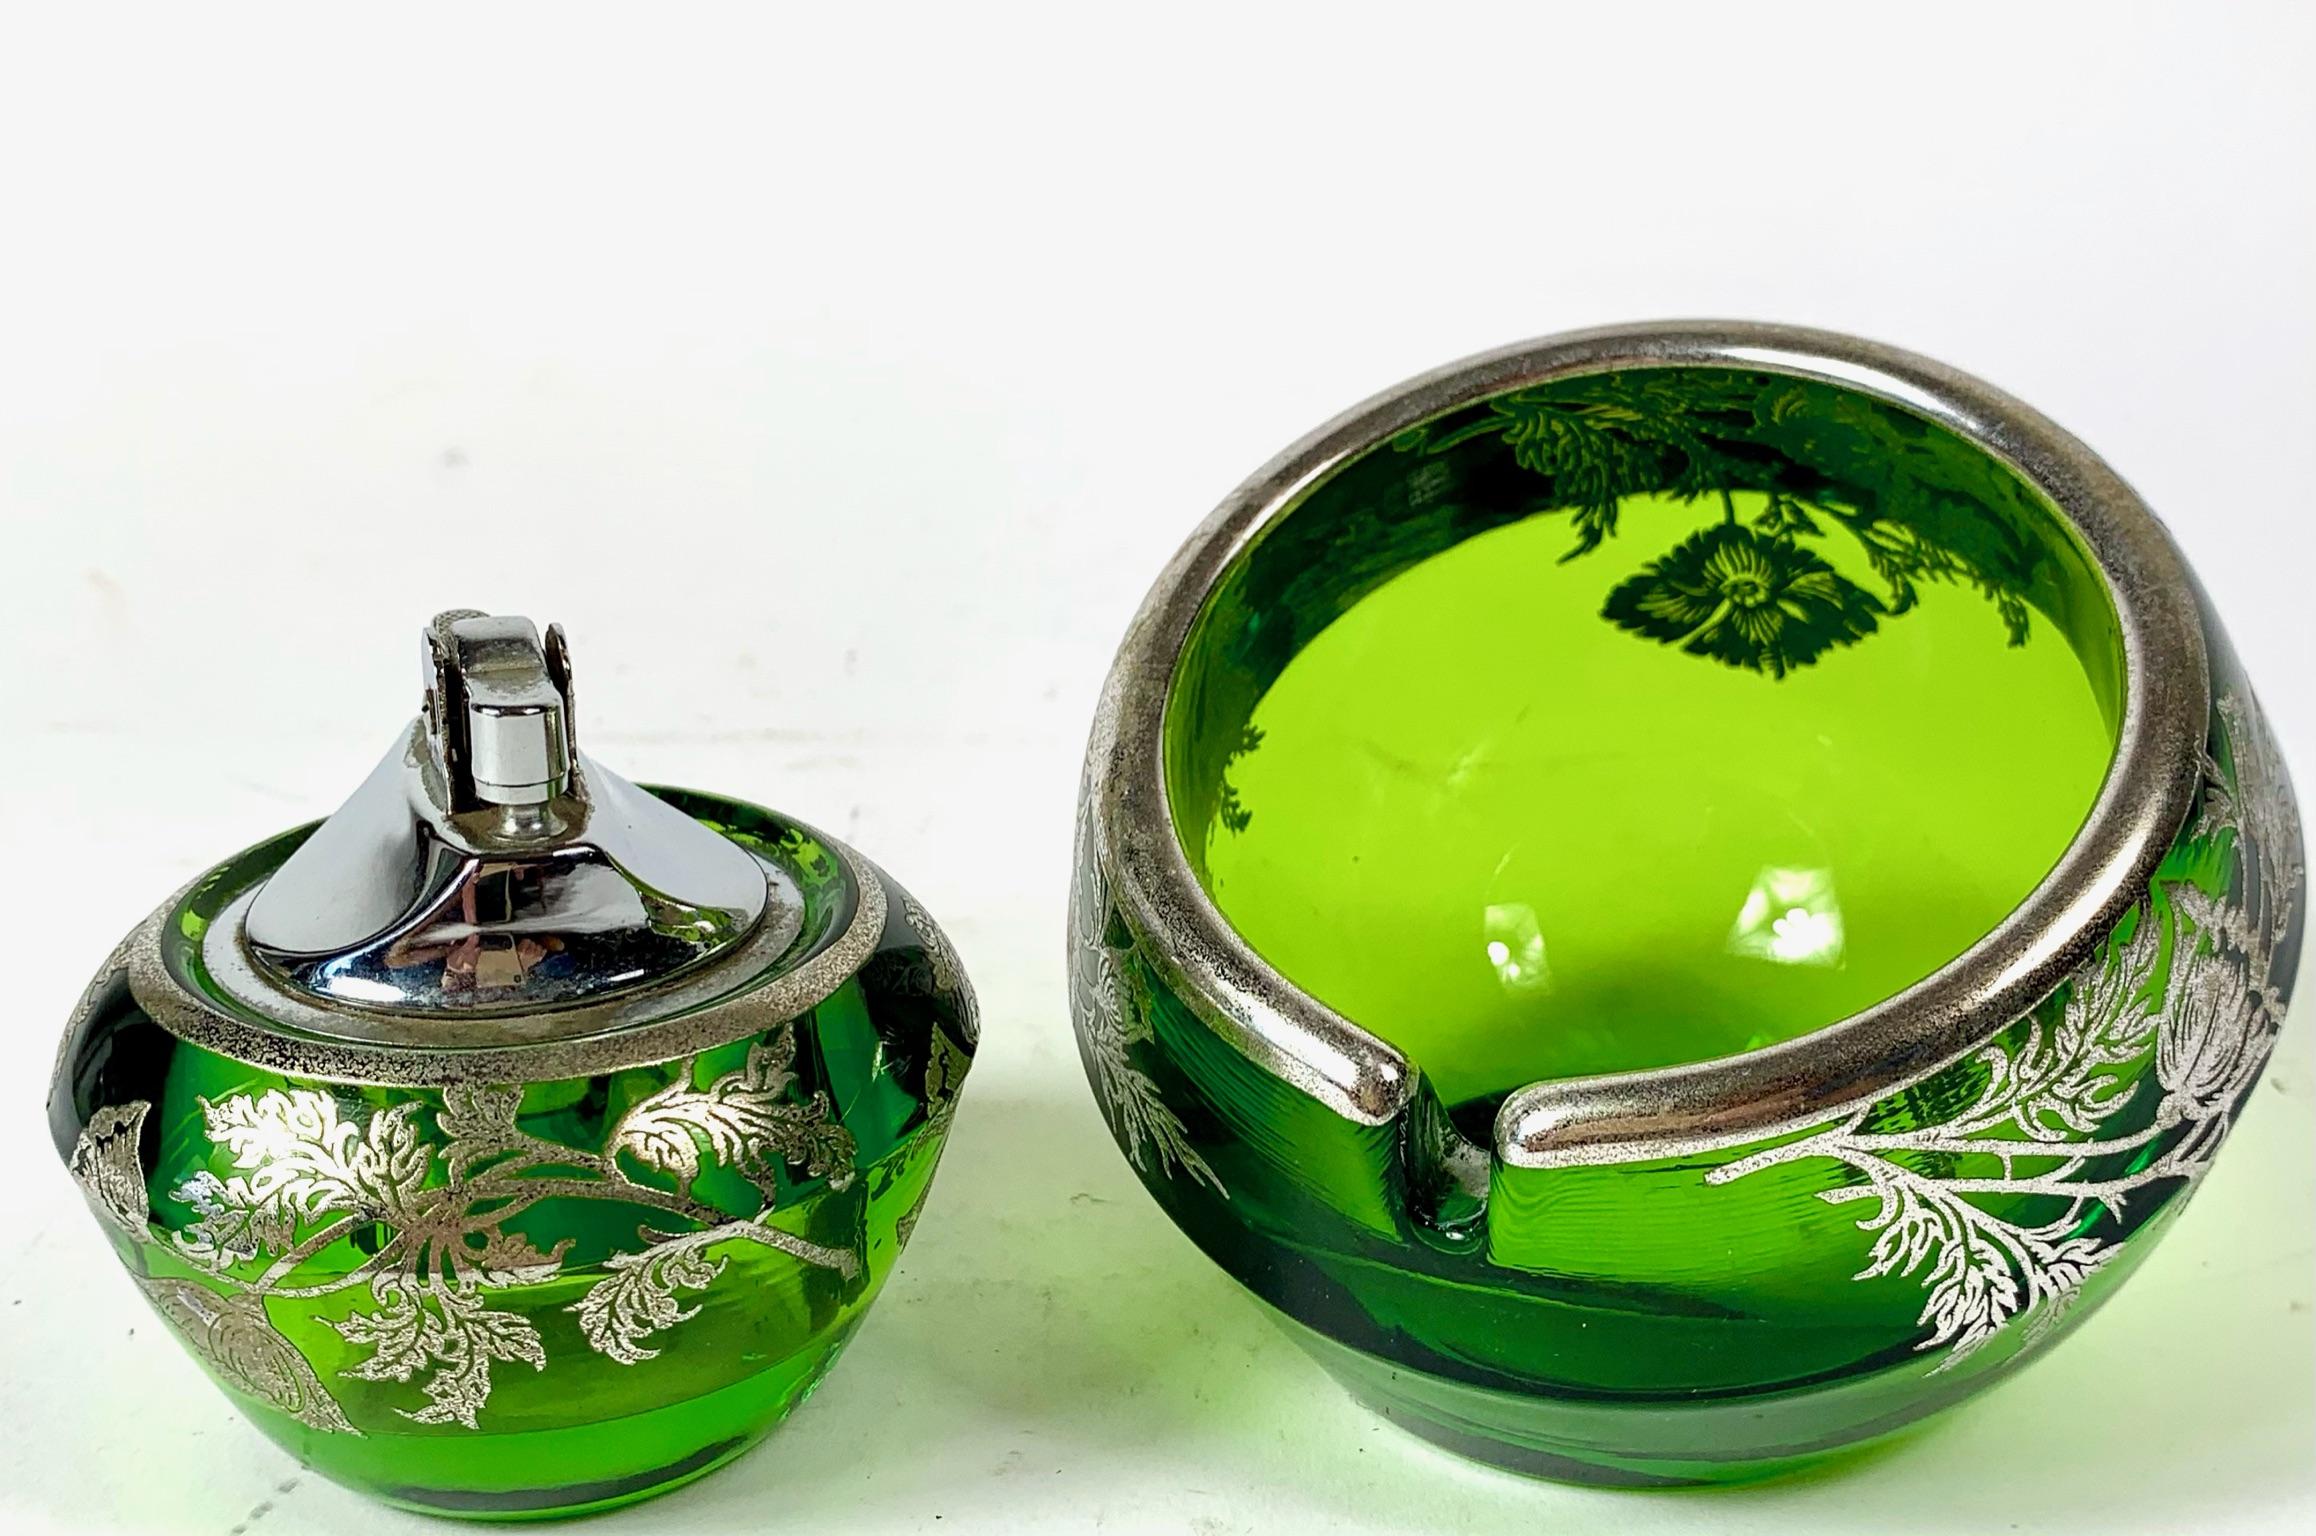 silver and jadeite ashtray and lighter